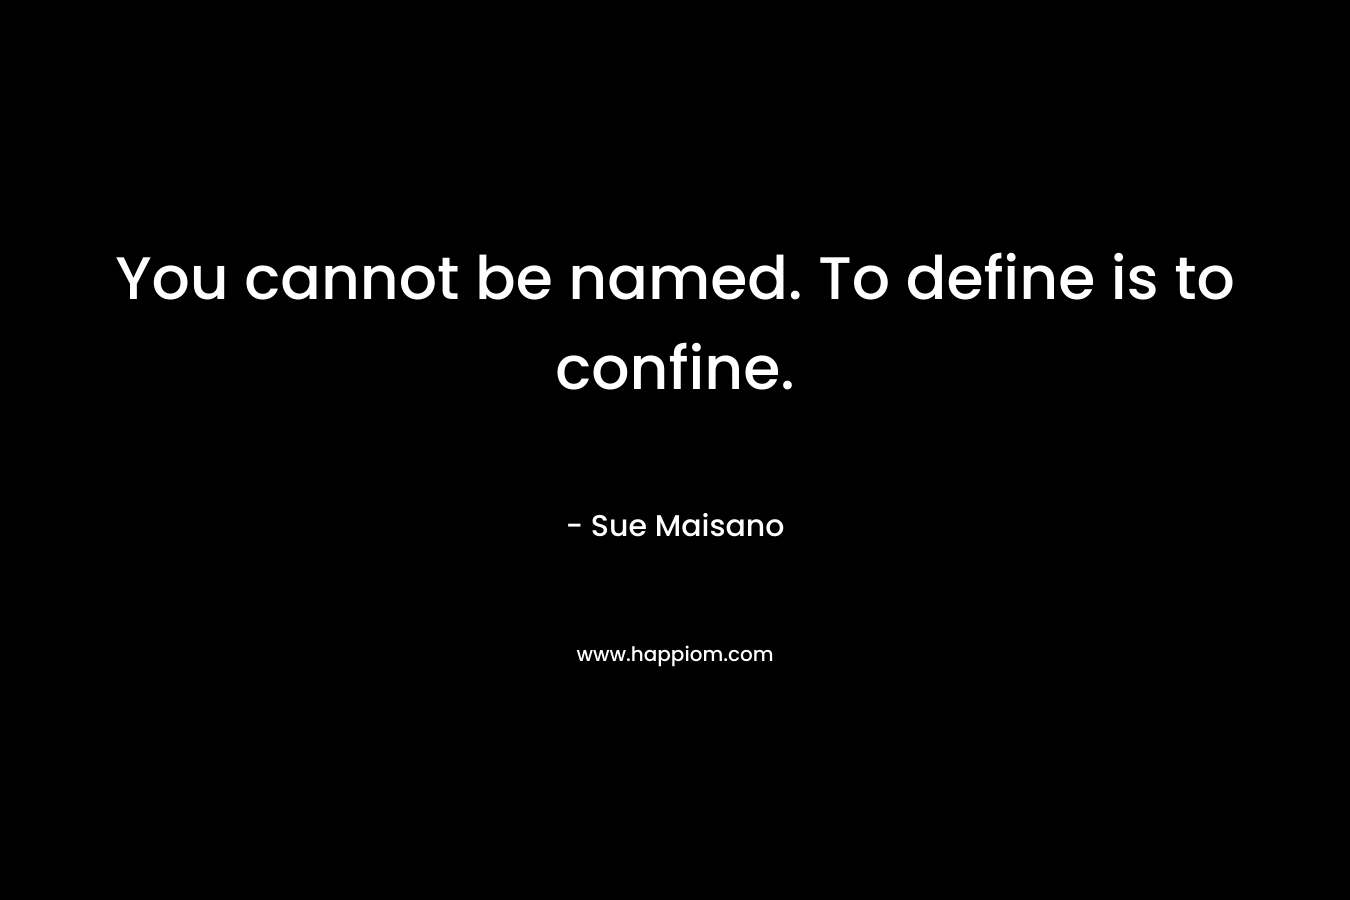 You cannot be named. To define is to confine. – Sue Maisano